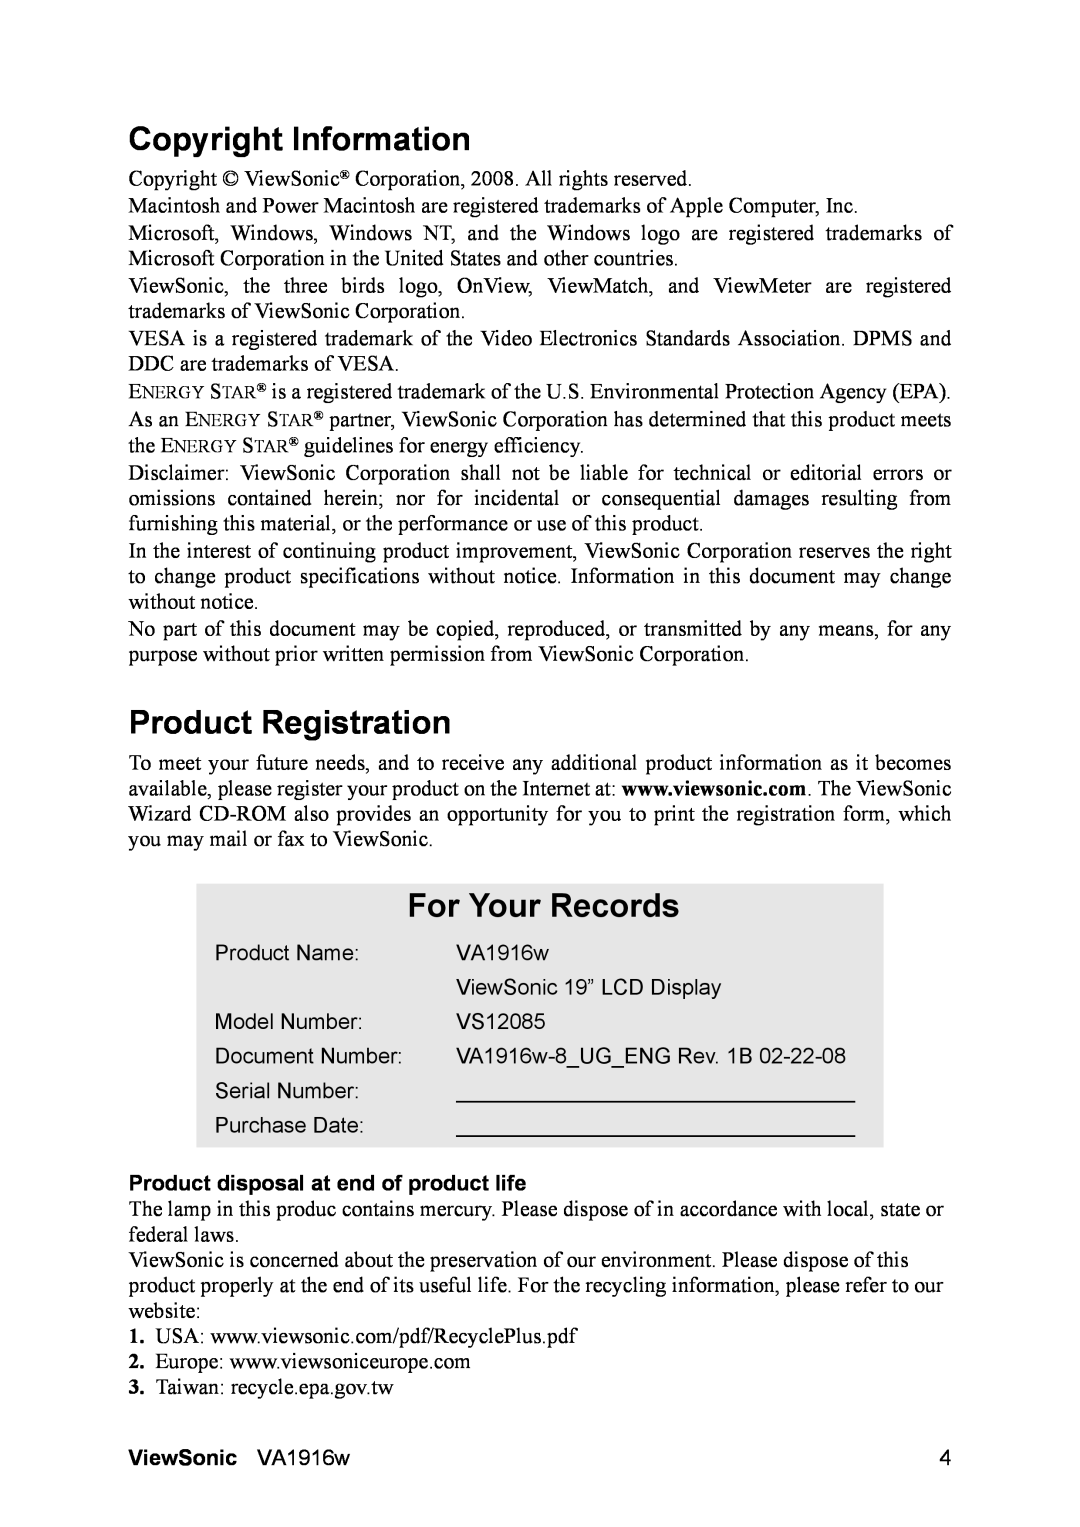 ViewSonic VS12085 Copyright Information, Product Registration, For Your Records, Product disposal at end of product life 